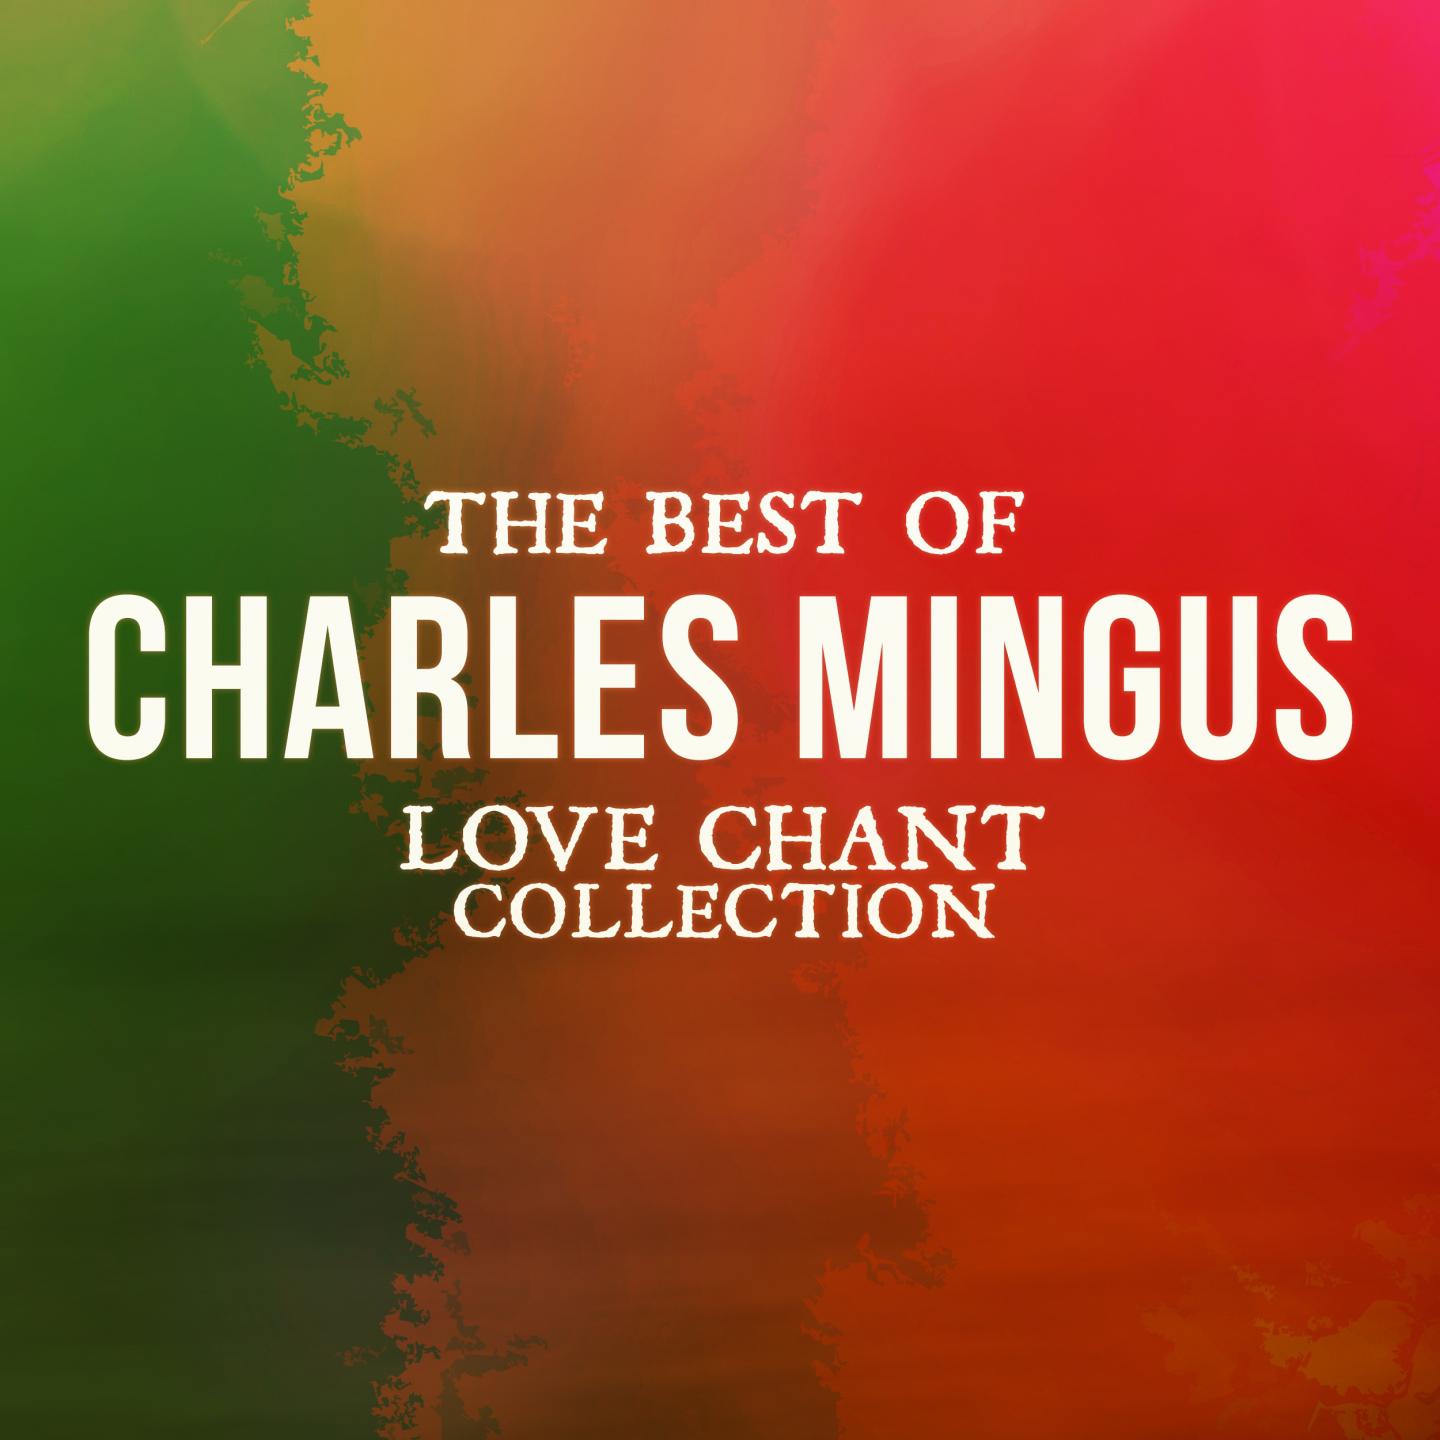 The Best Of Charles Mingus (Love Chant Collection)